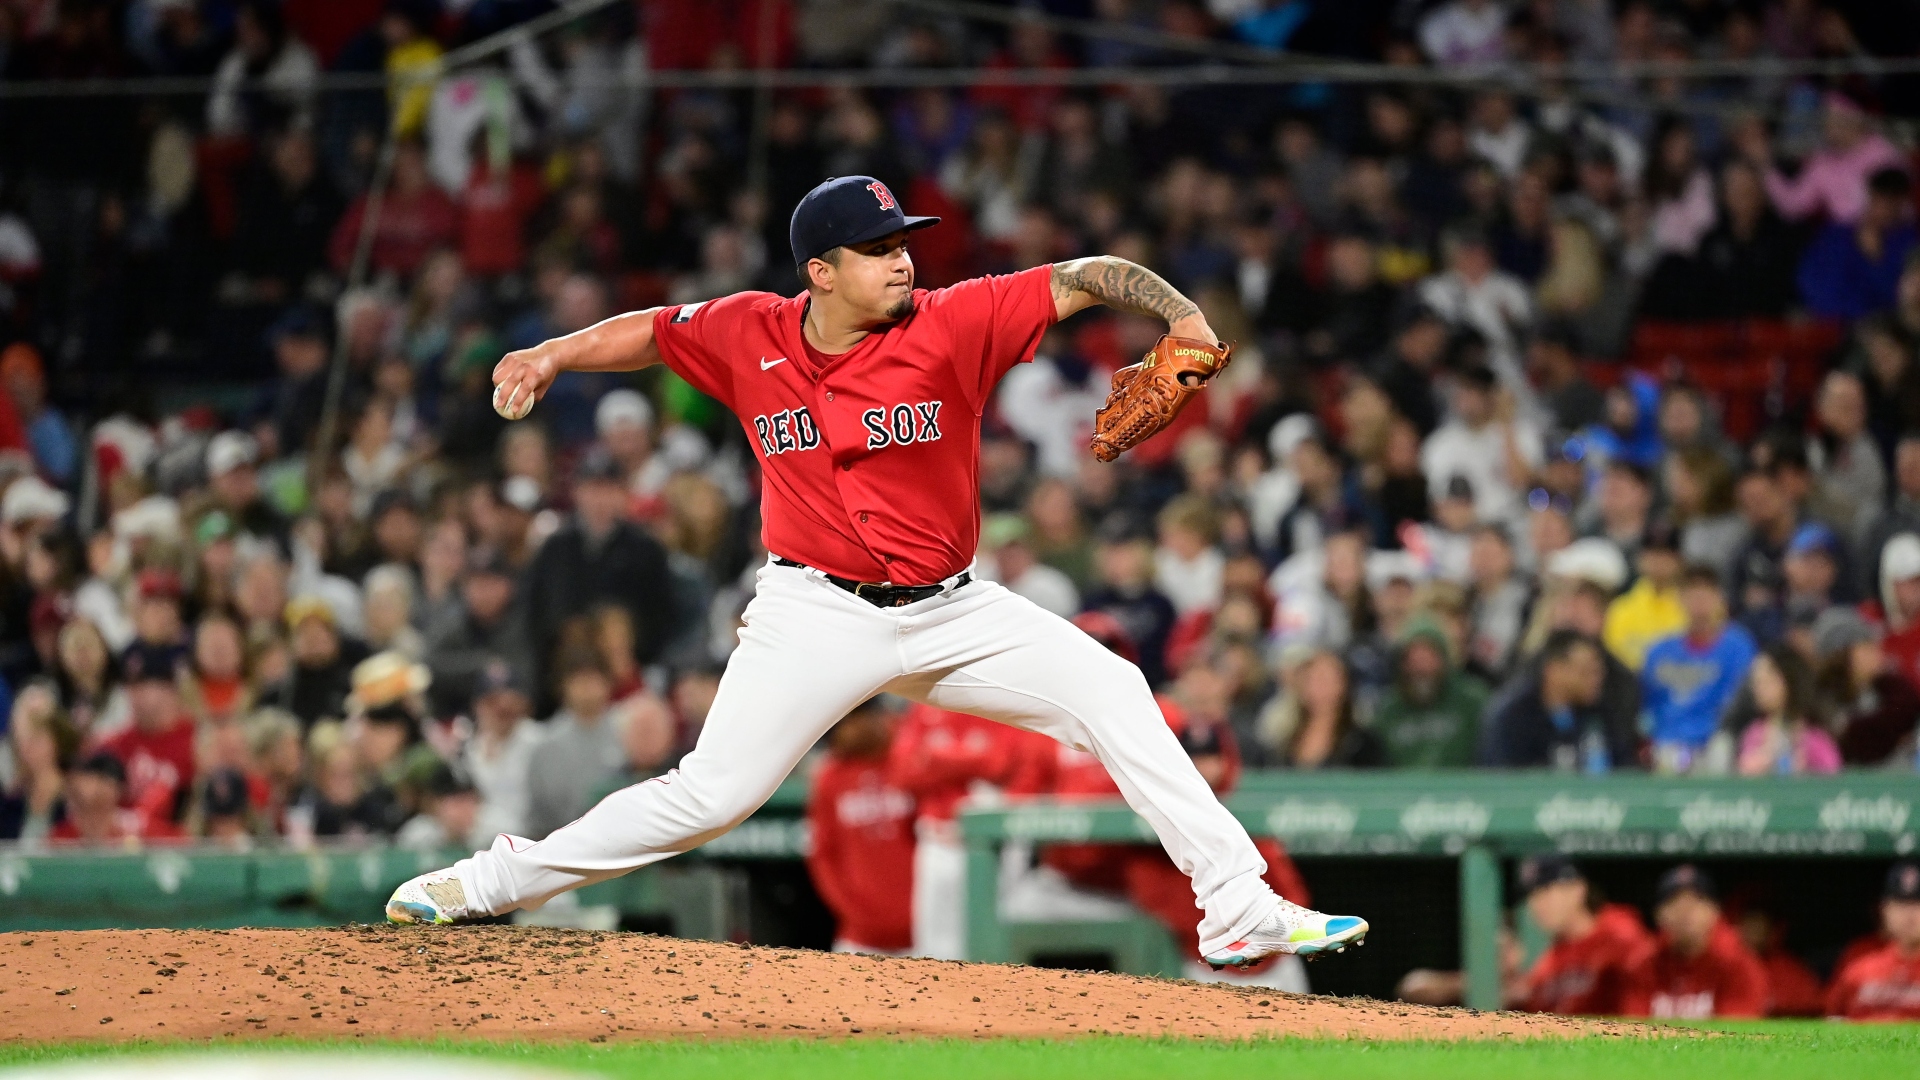 Ex-Red Sox Pitcher DFA'd, Claimed Off Waivers By Mariners